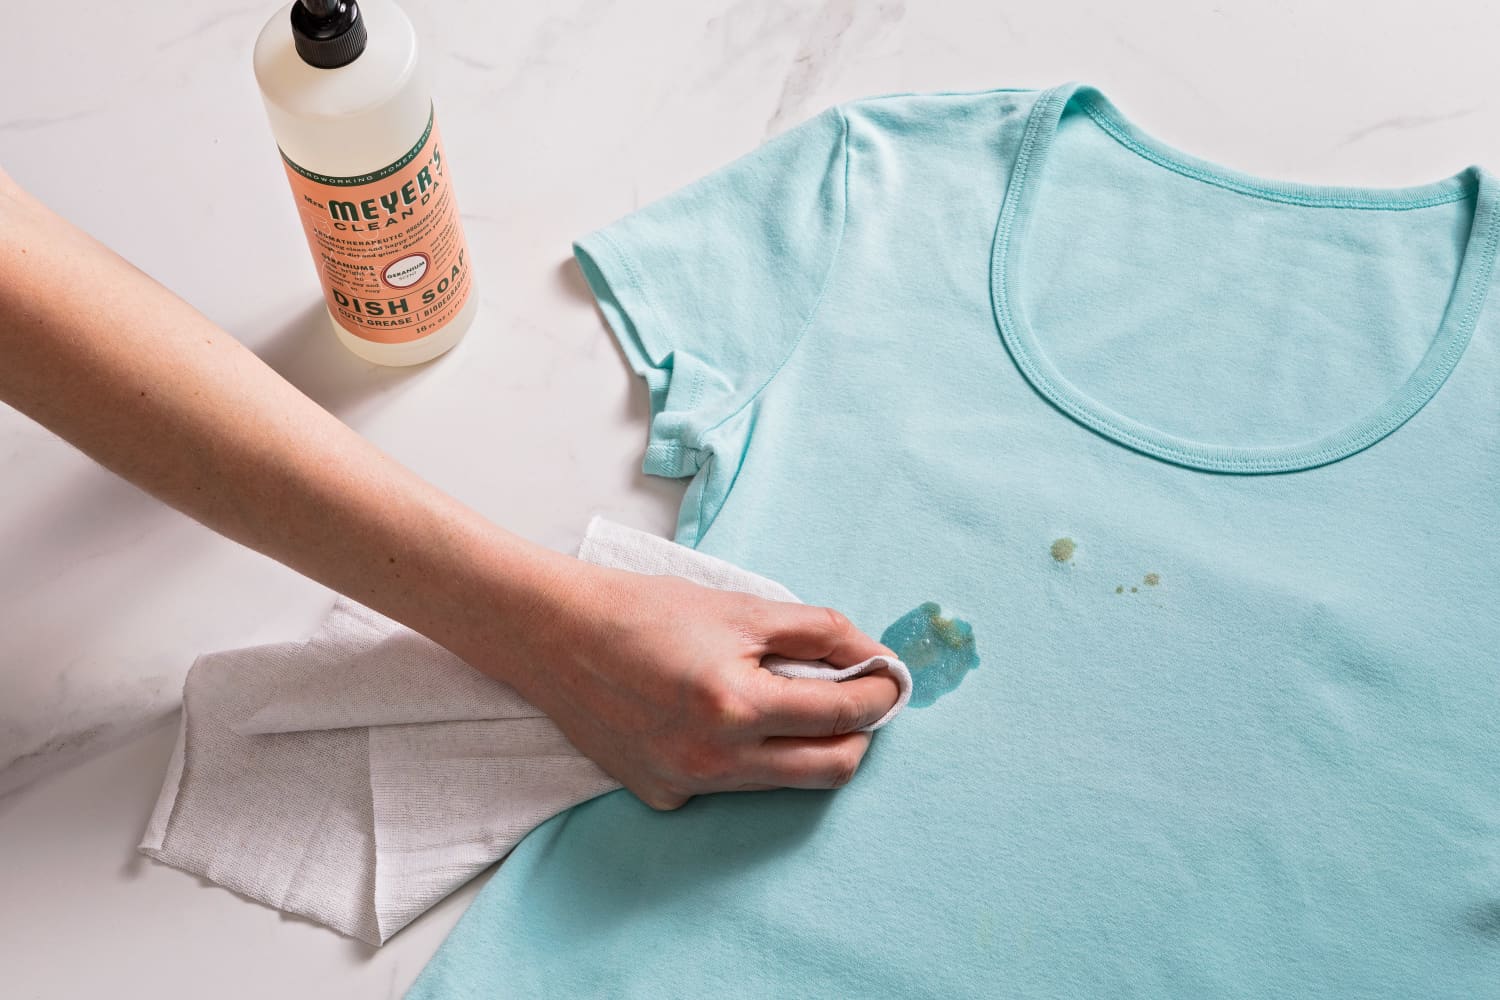 How to Get Oil Stains Out of Clothes Naturally